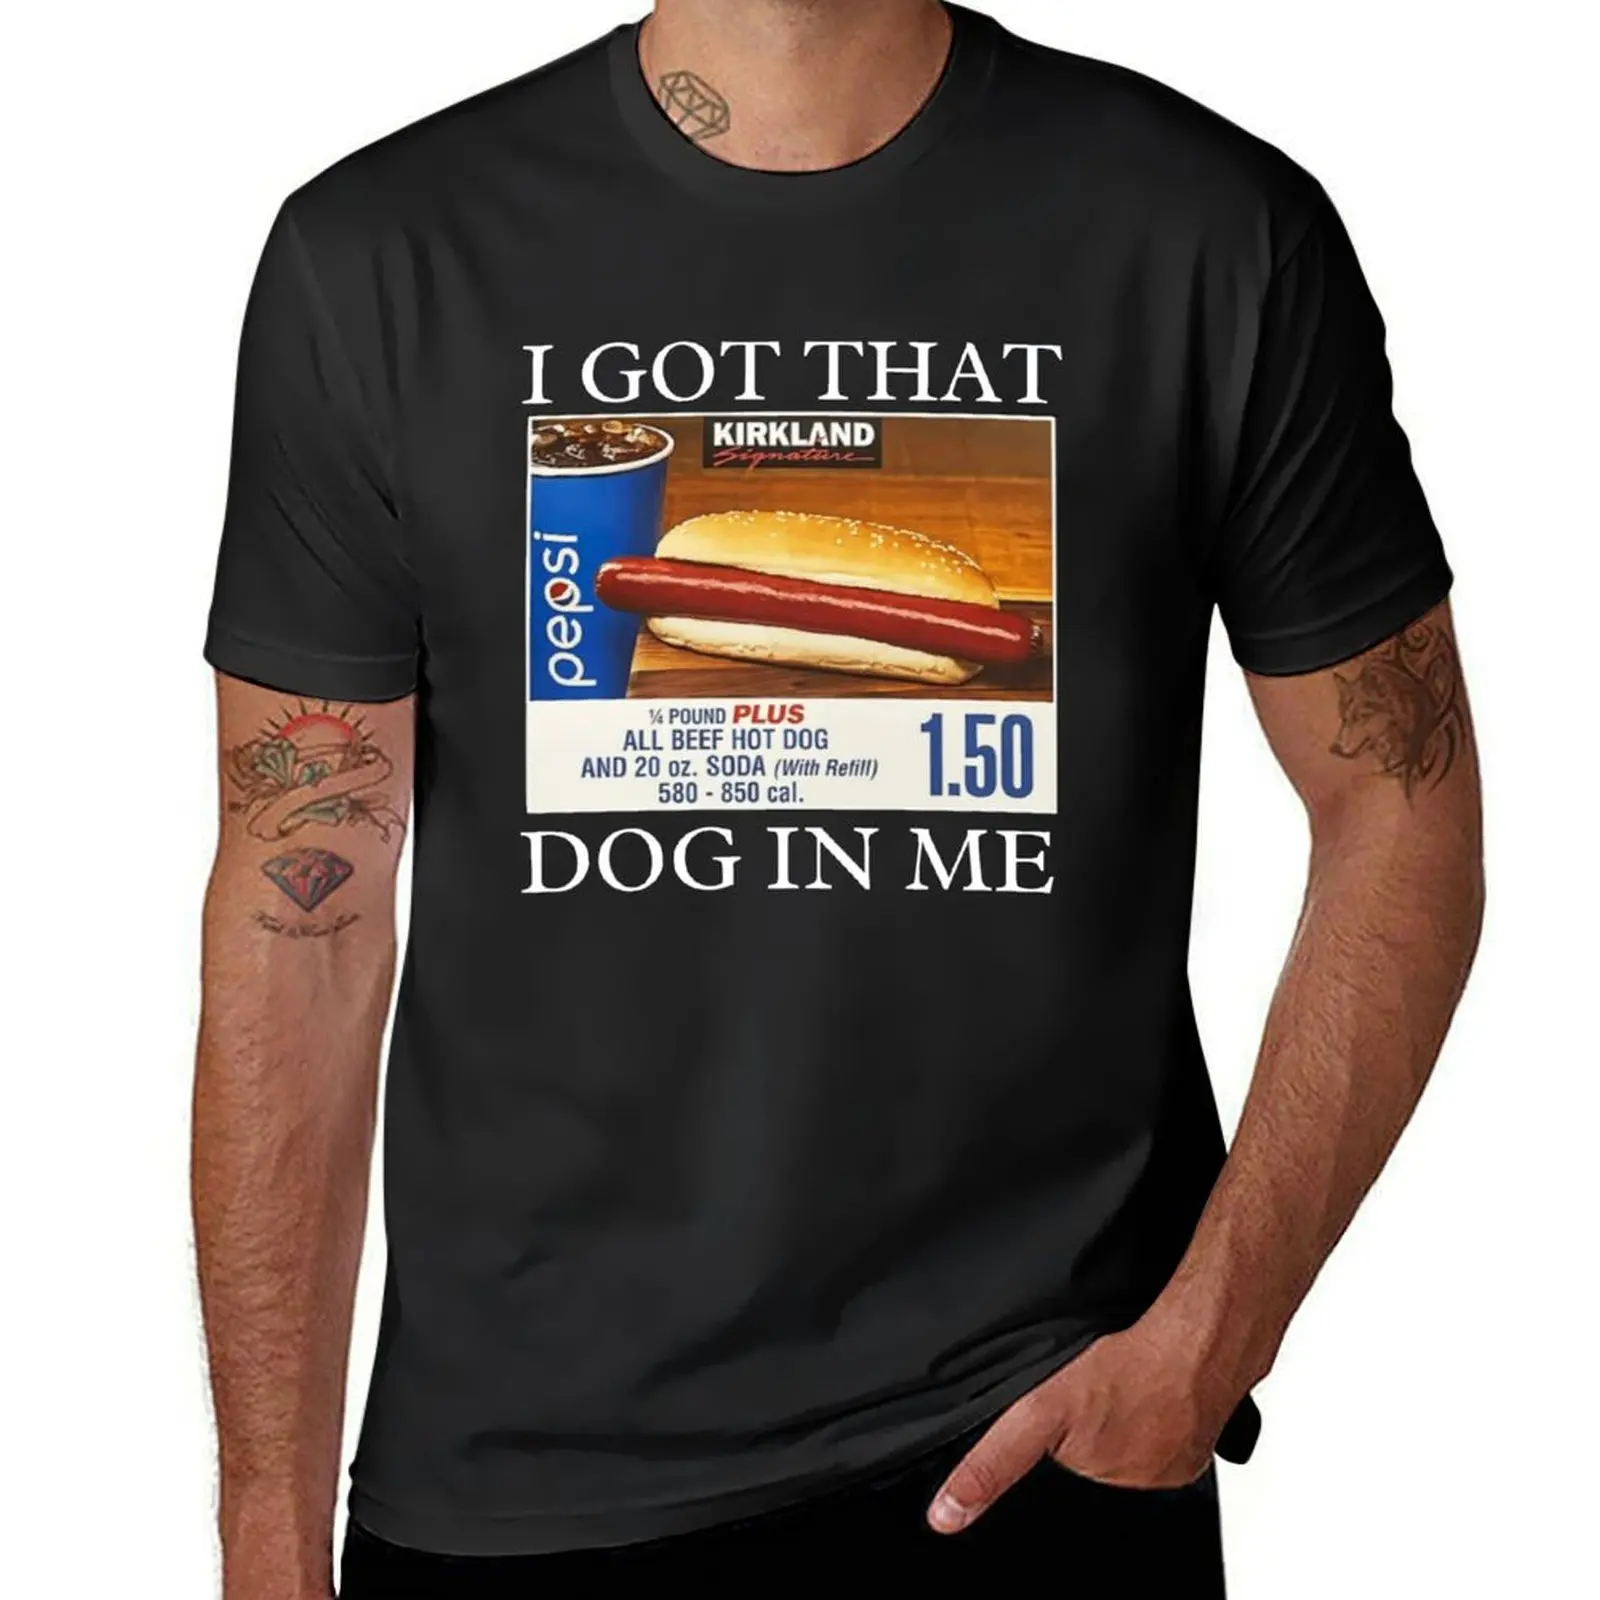 

i got that dog in me - i got that dog in me T-Shirt customs design your own anime Men's t shirts